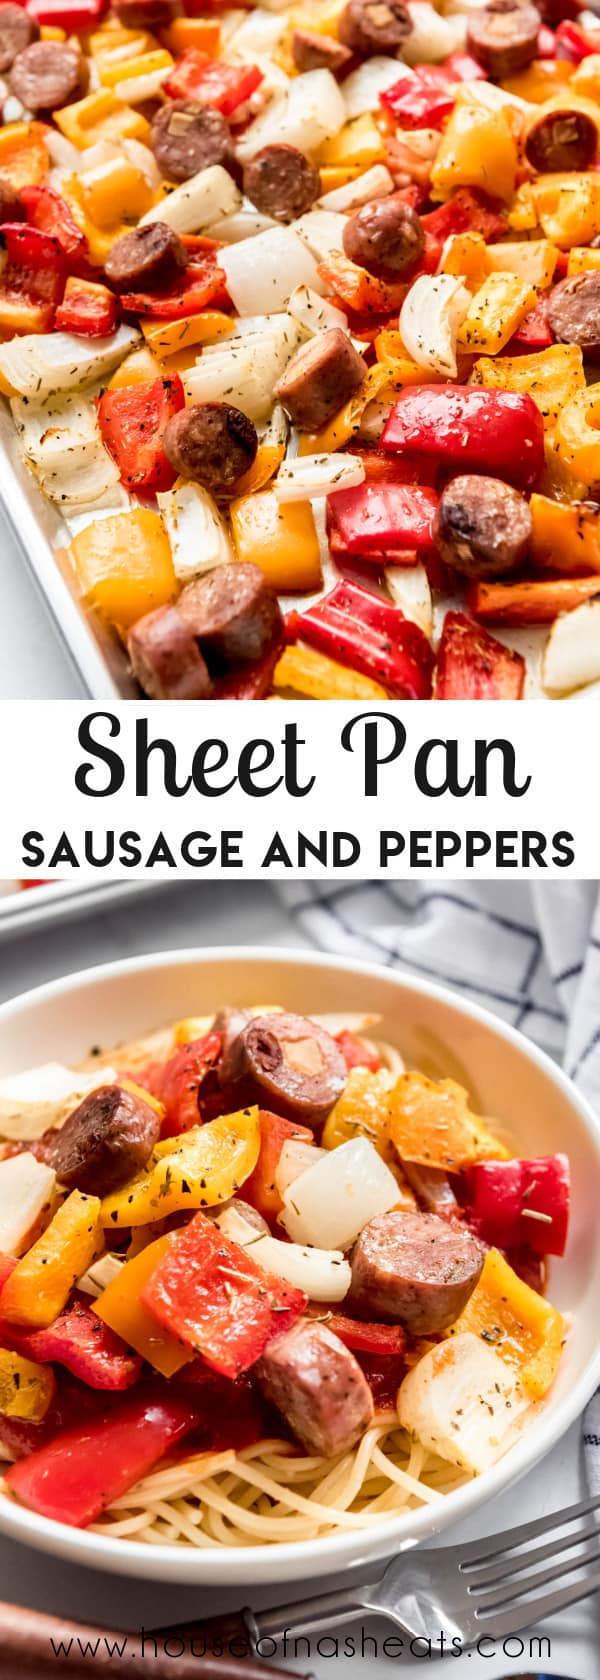 A collage of images of sheet pan sausages and peppers with text overlay.